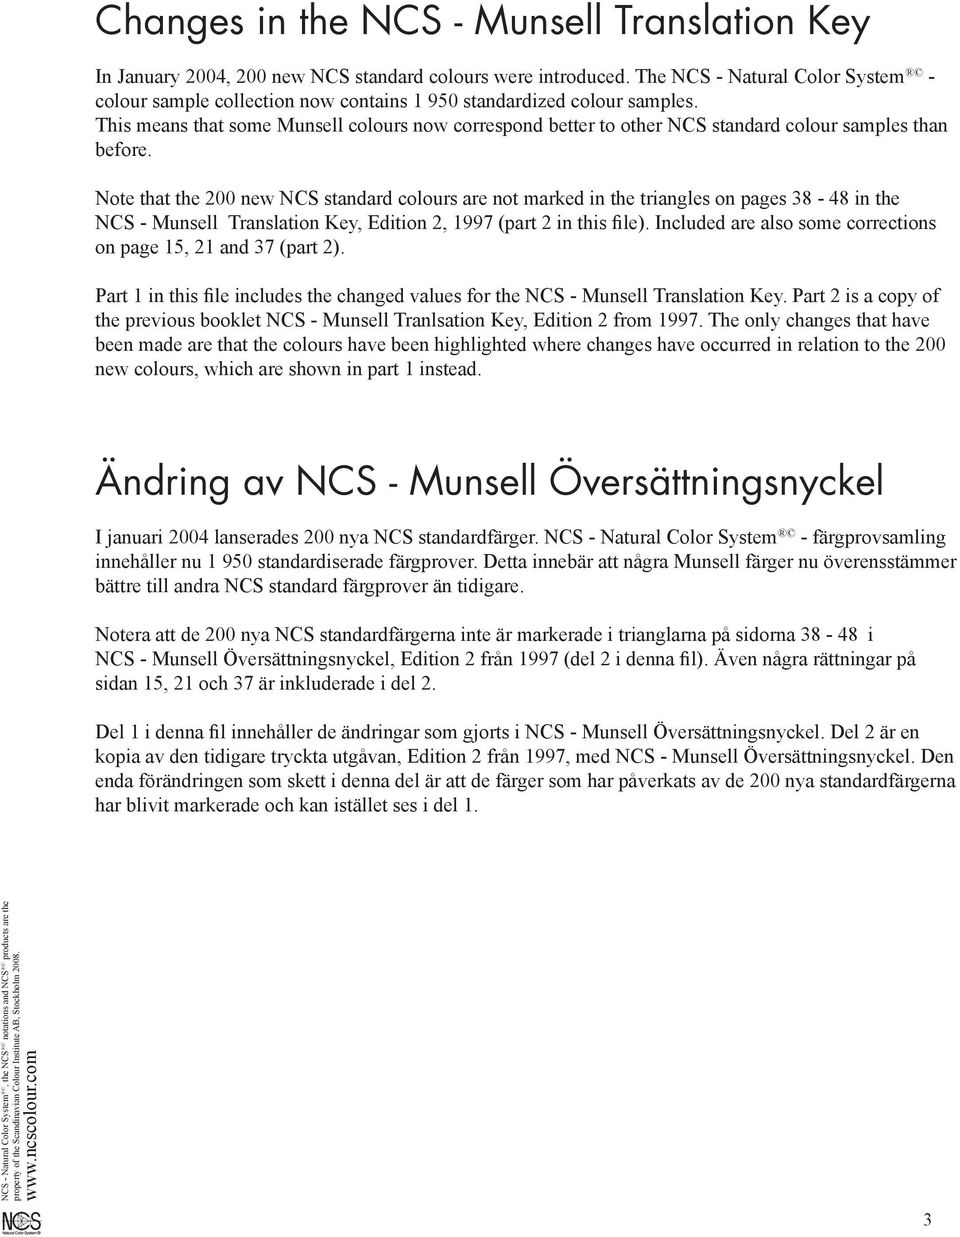 Note that the 0 new N standard colours are not marked in the triangles on pages 38-48 in the N - Munsell Translation Key, Edition 2, 1997 (part 2 in this file).